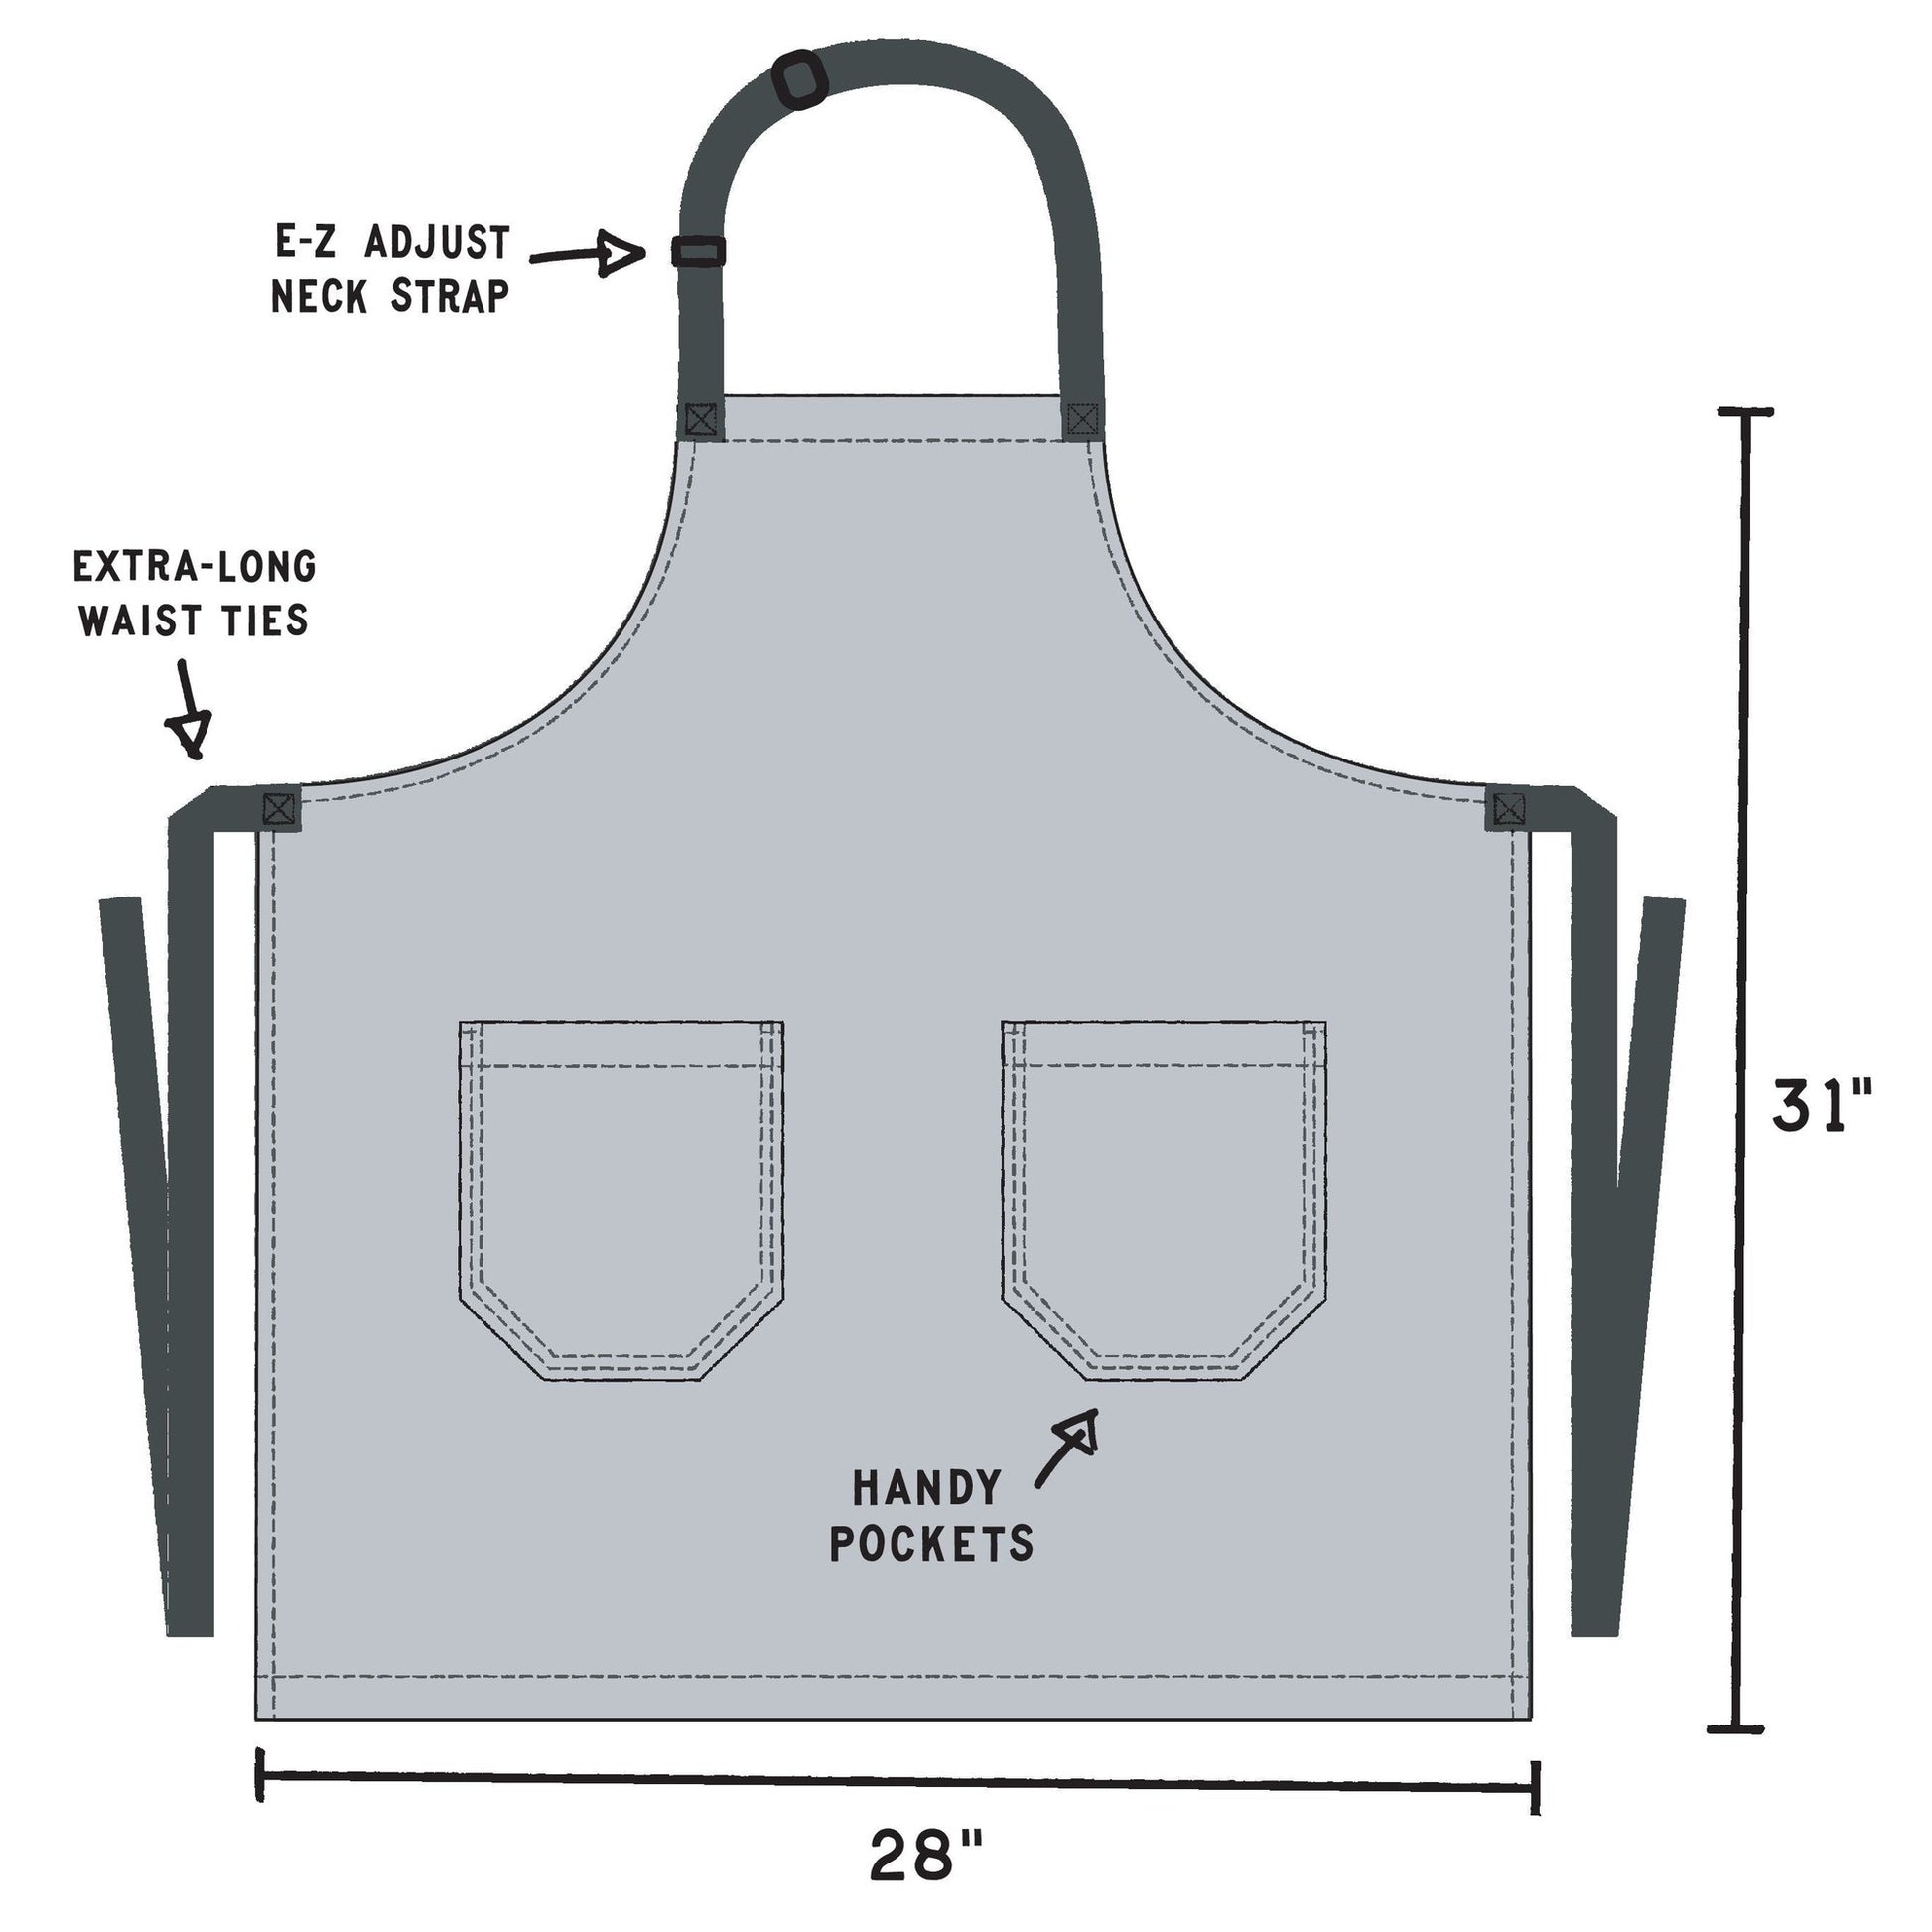 I'm A Lil' Barista Funny Cooking and Coffeemaking Apron Unisex 2 Pockets Adjustable Strap 100% Cotton